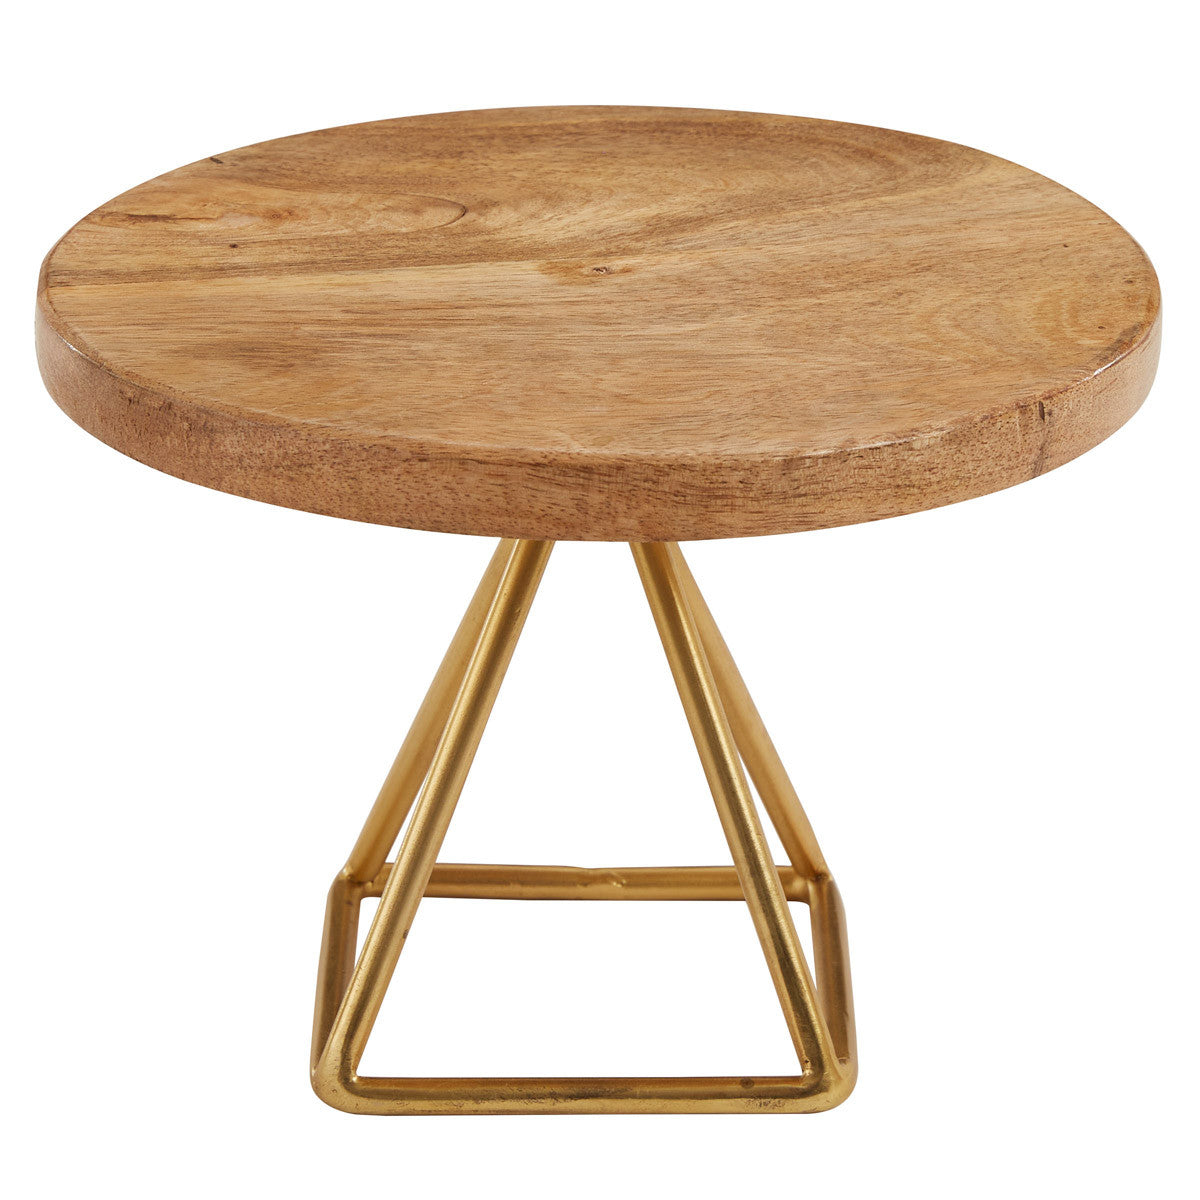 Wood/Gold Triangle Serving Stand Short - Park Designs